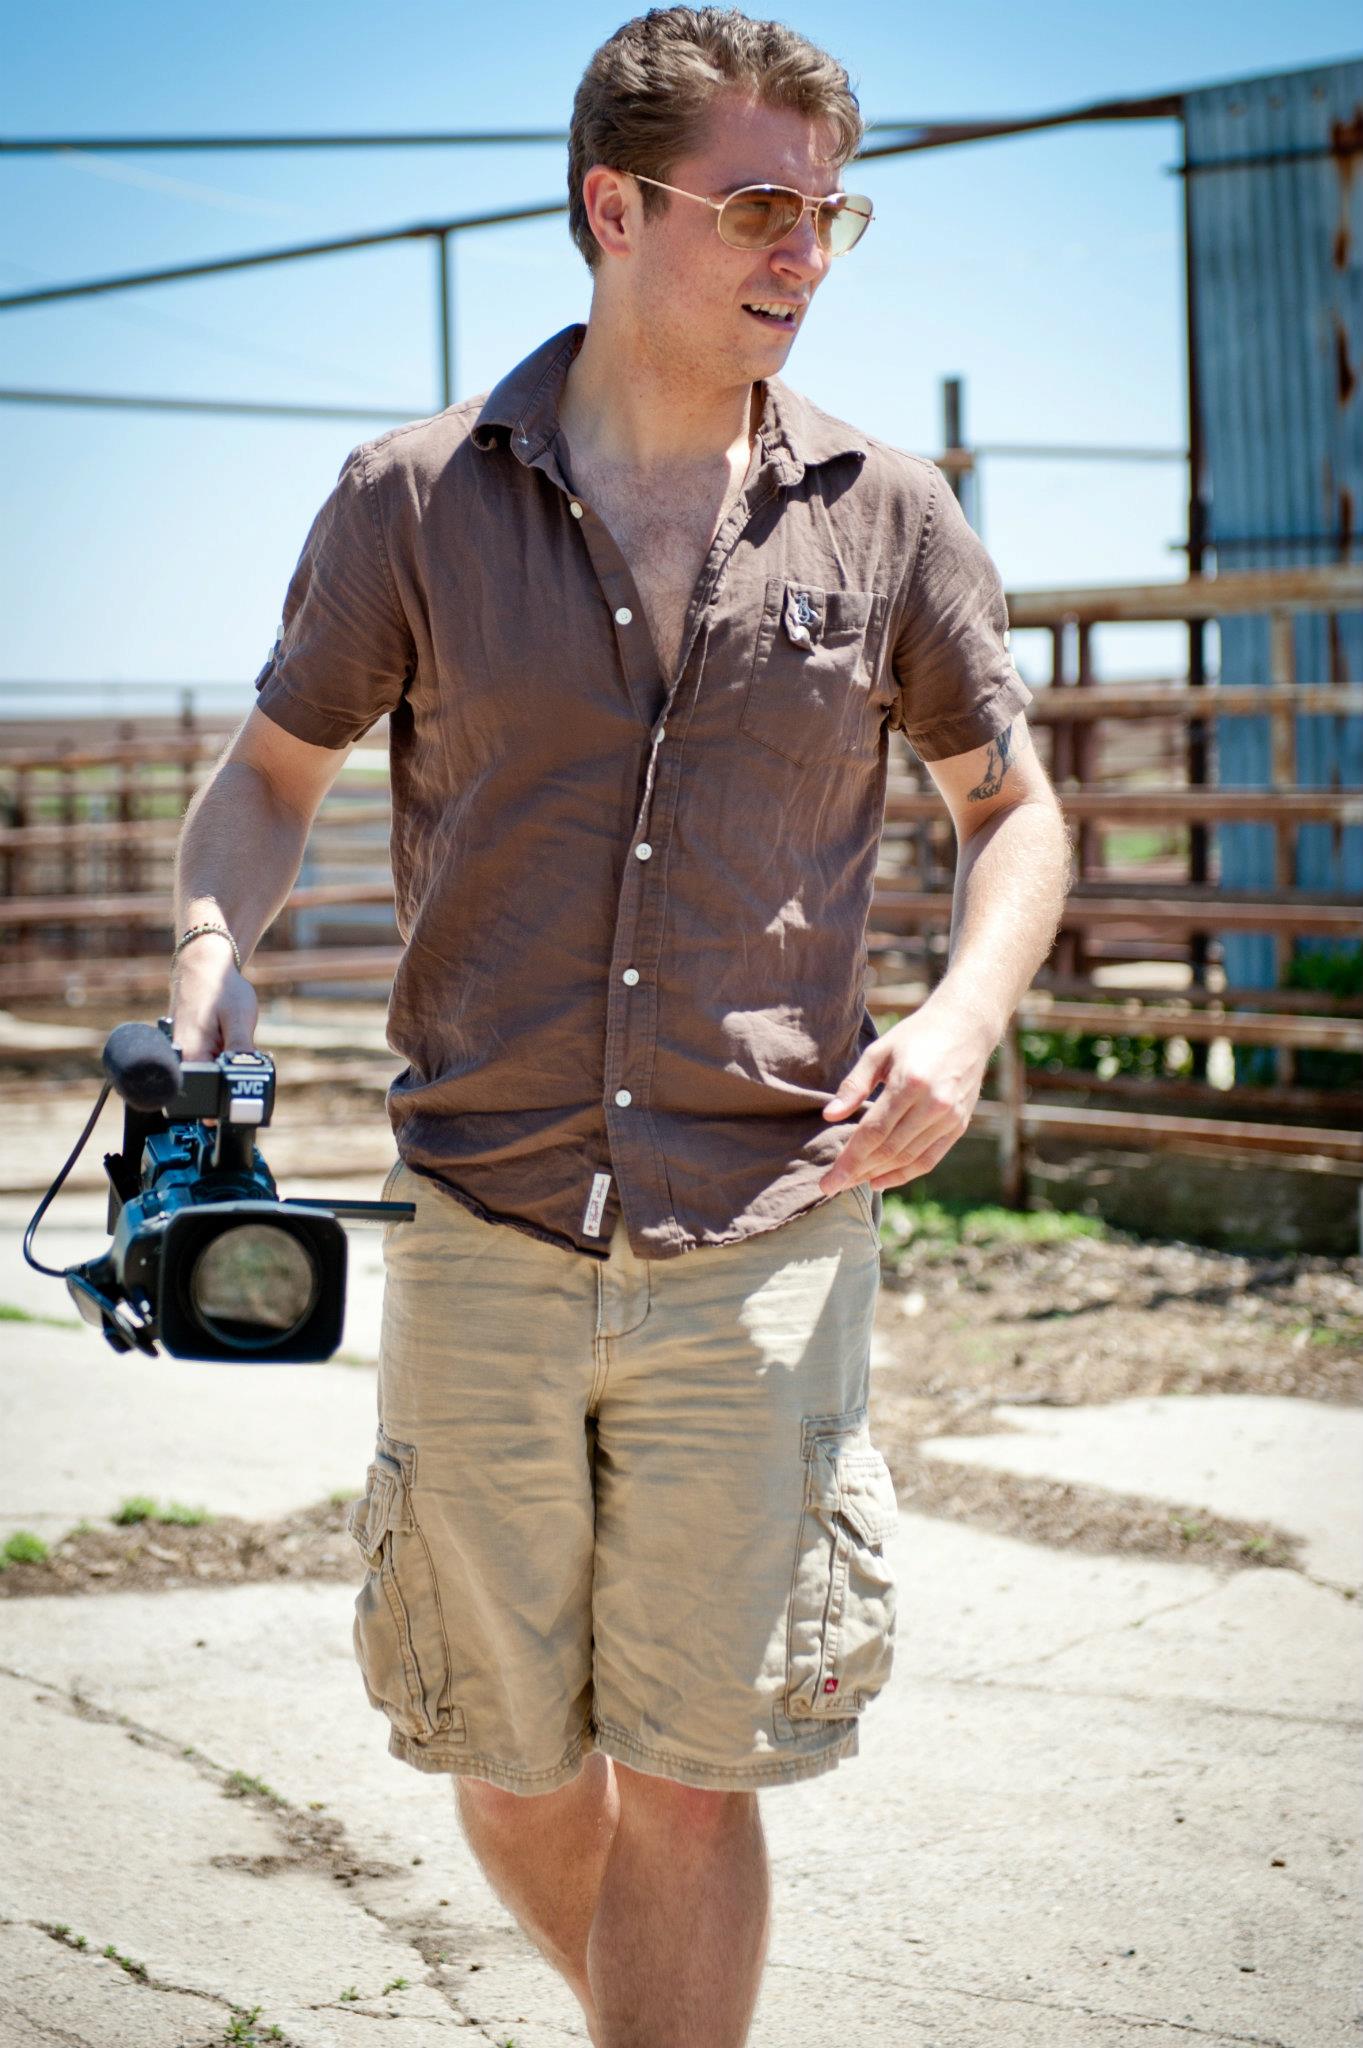 Kristian Day on set in Wall Lake, Iowa while filming Capone's Whiskey: The Story of Templeton Rye